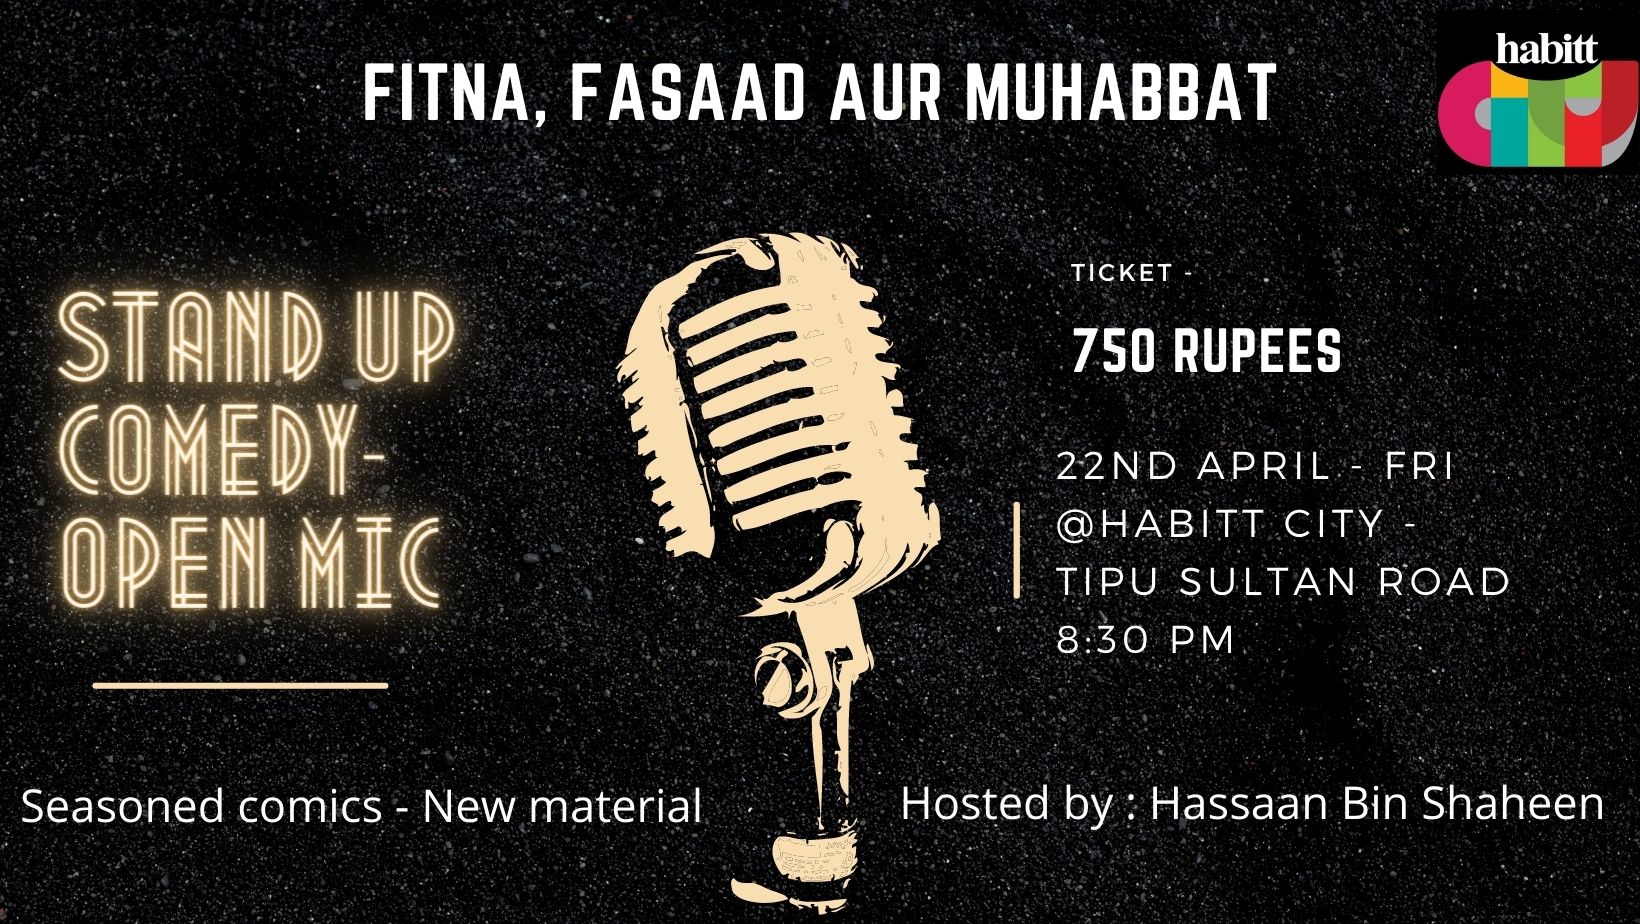 Stand up Comedy Open Mic - Fitna Fasaad aur Muhabbbat